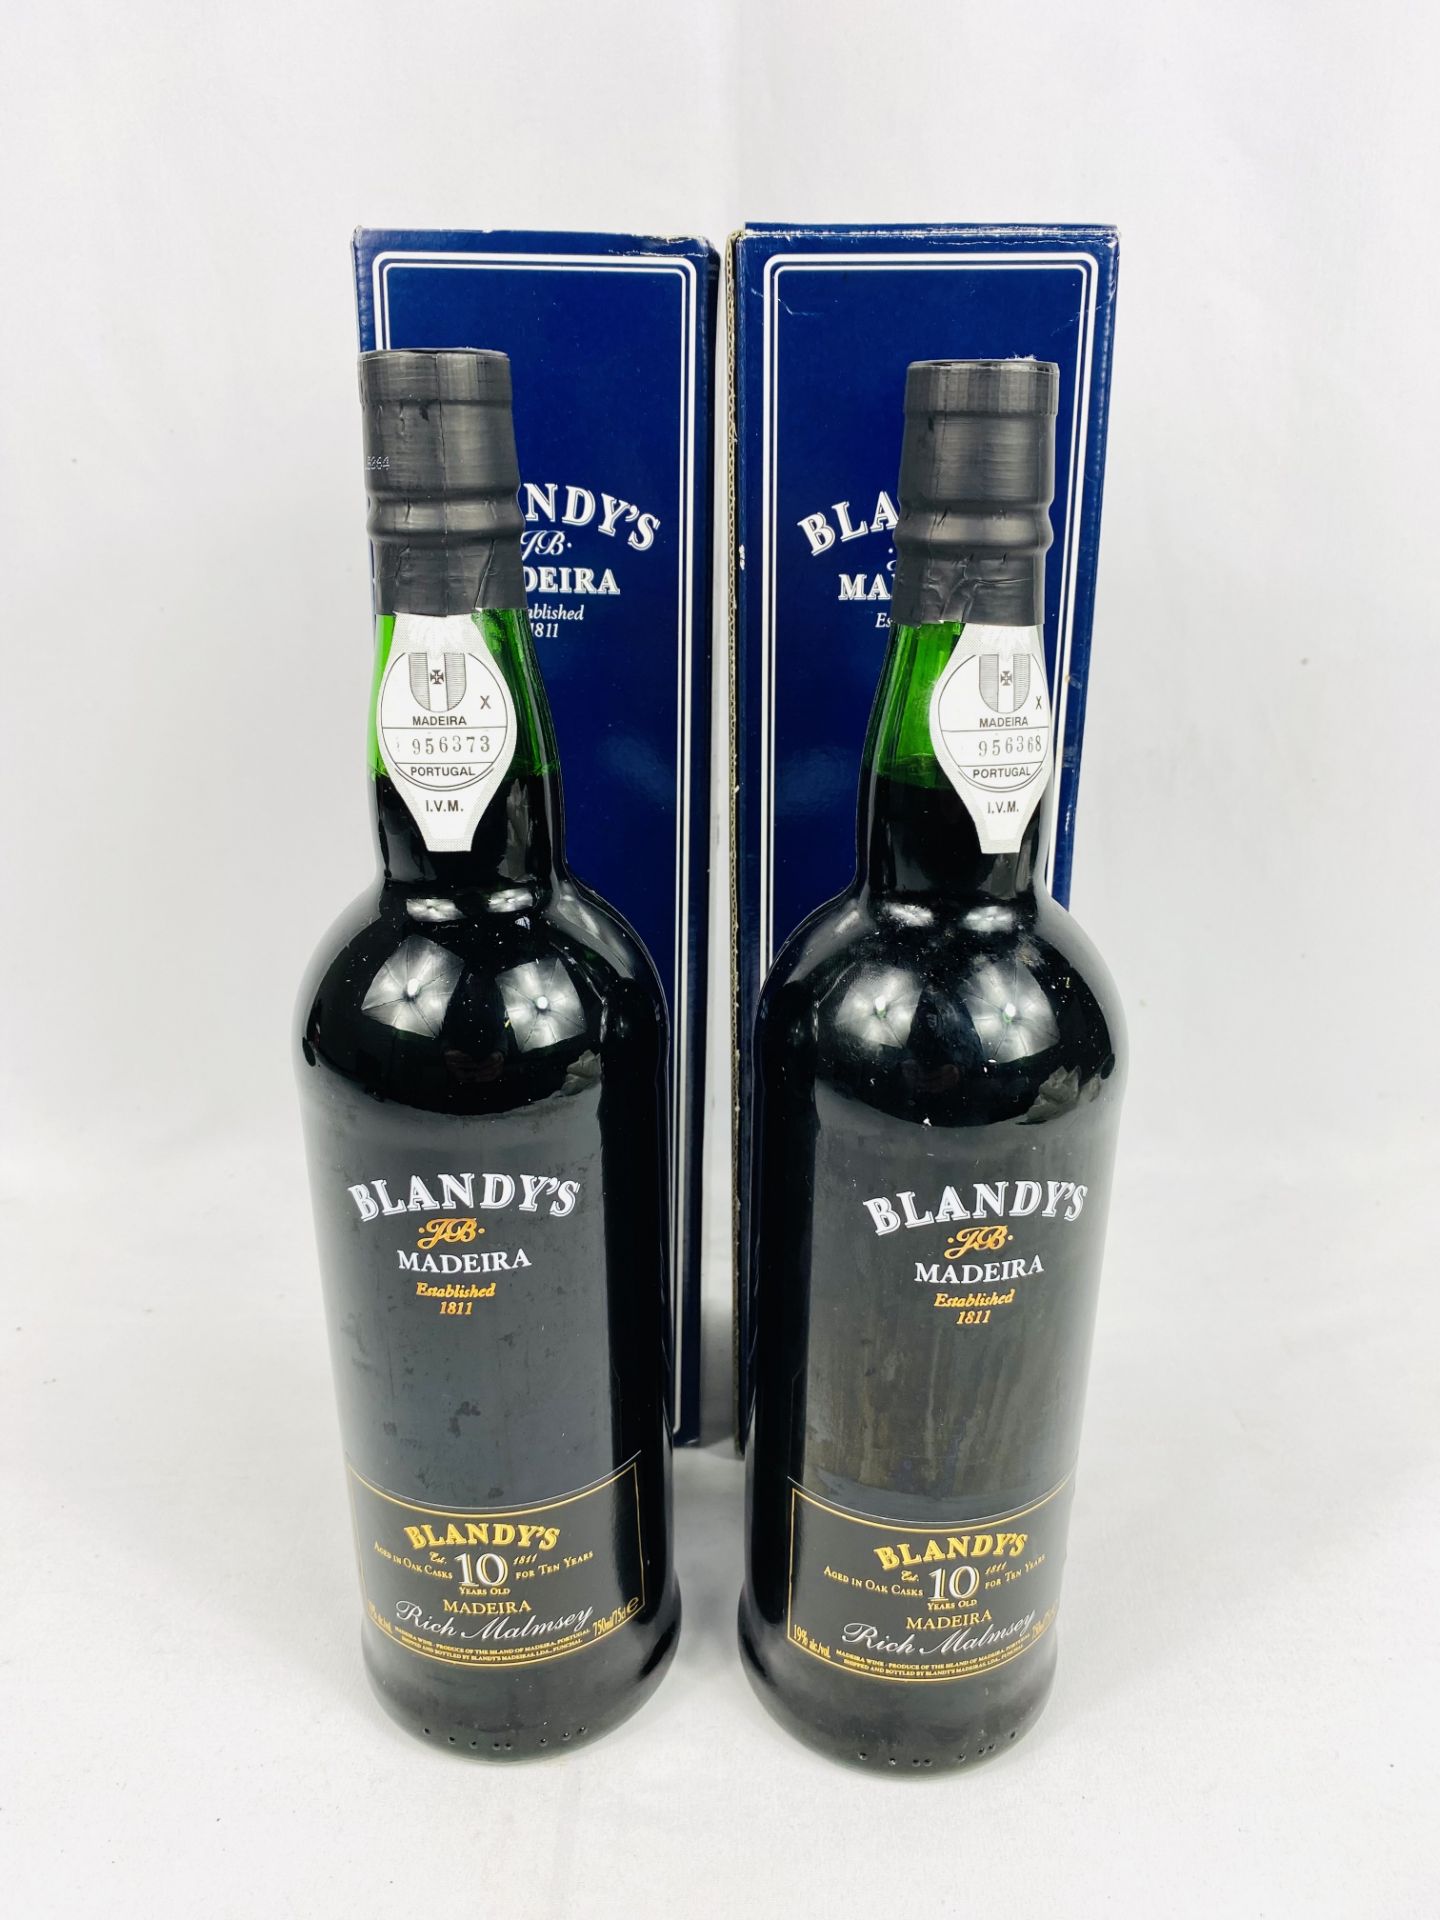 Two 75cl bottles of Blandy's Malmsey Madeira.